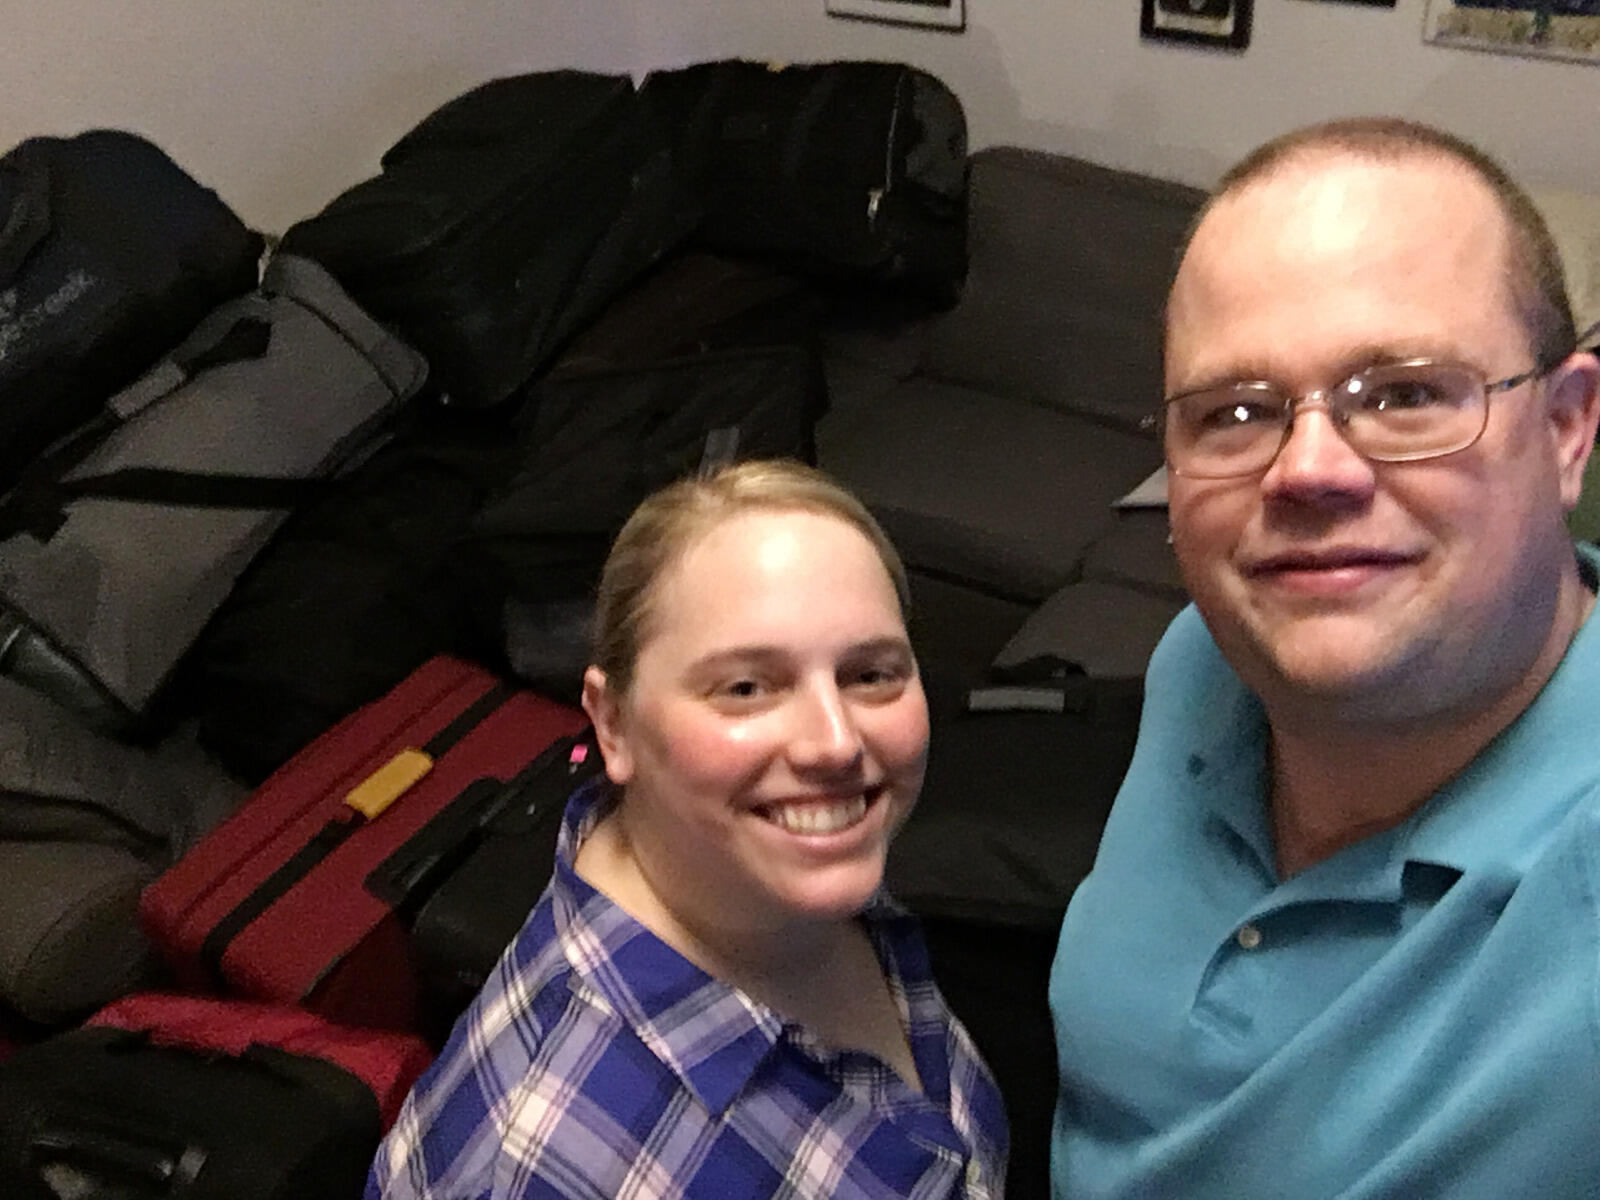 Mark Ryan and Emily Peron are two of six VCU clinicians and students traveling to Puerto Rico Dec. 16 to assist with Hurricane Maria relief efforts.
<br>Contributed photos 